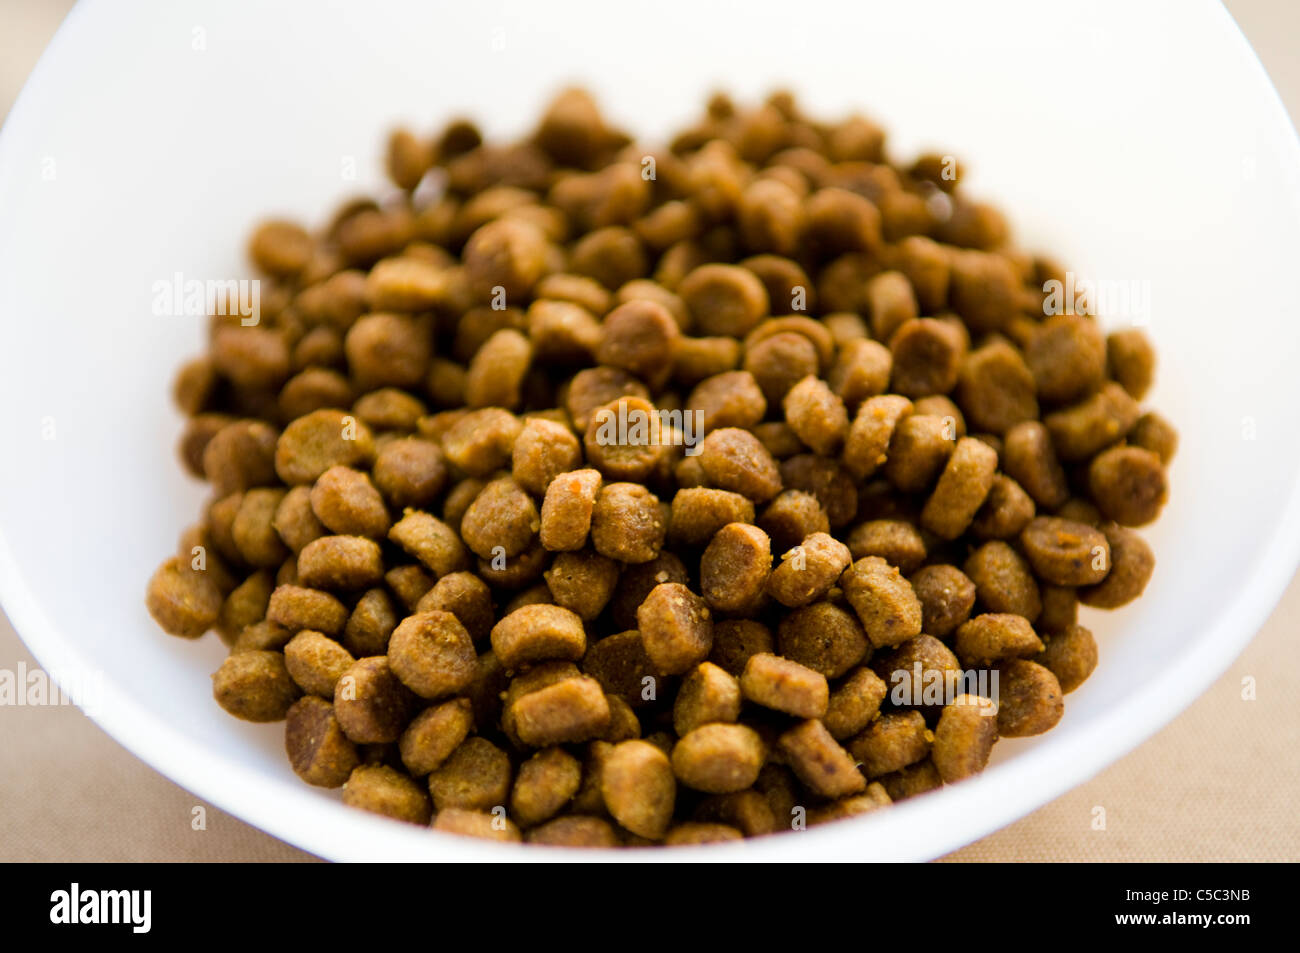 A bowl of dry dog food. Stock Photo